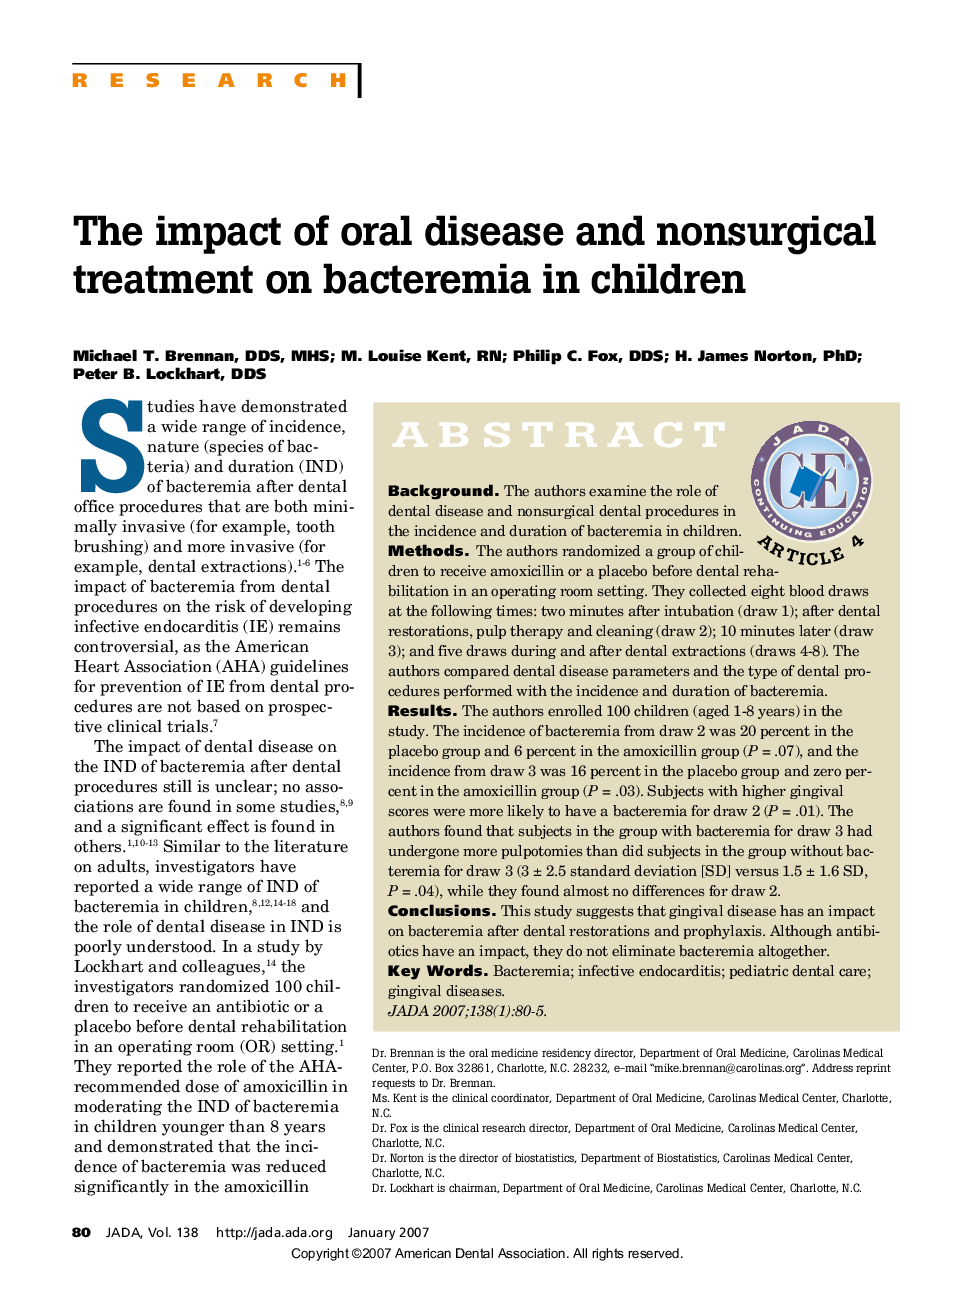 The impact of oral disease and nonsurgical treatment on bacteremia in children 